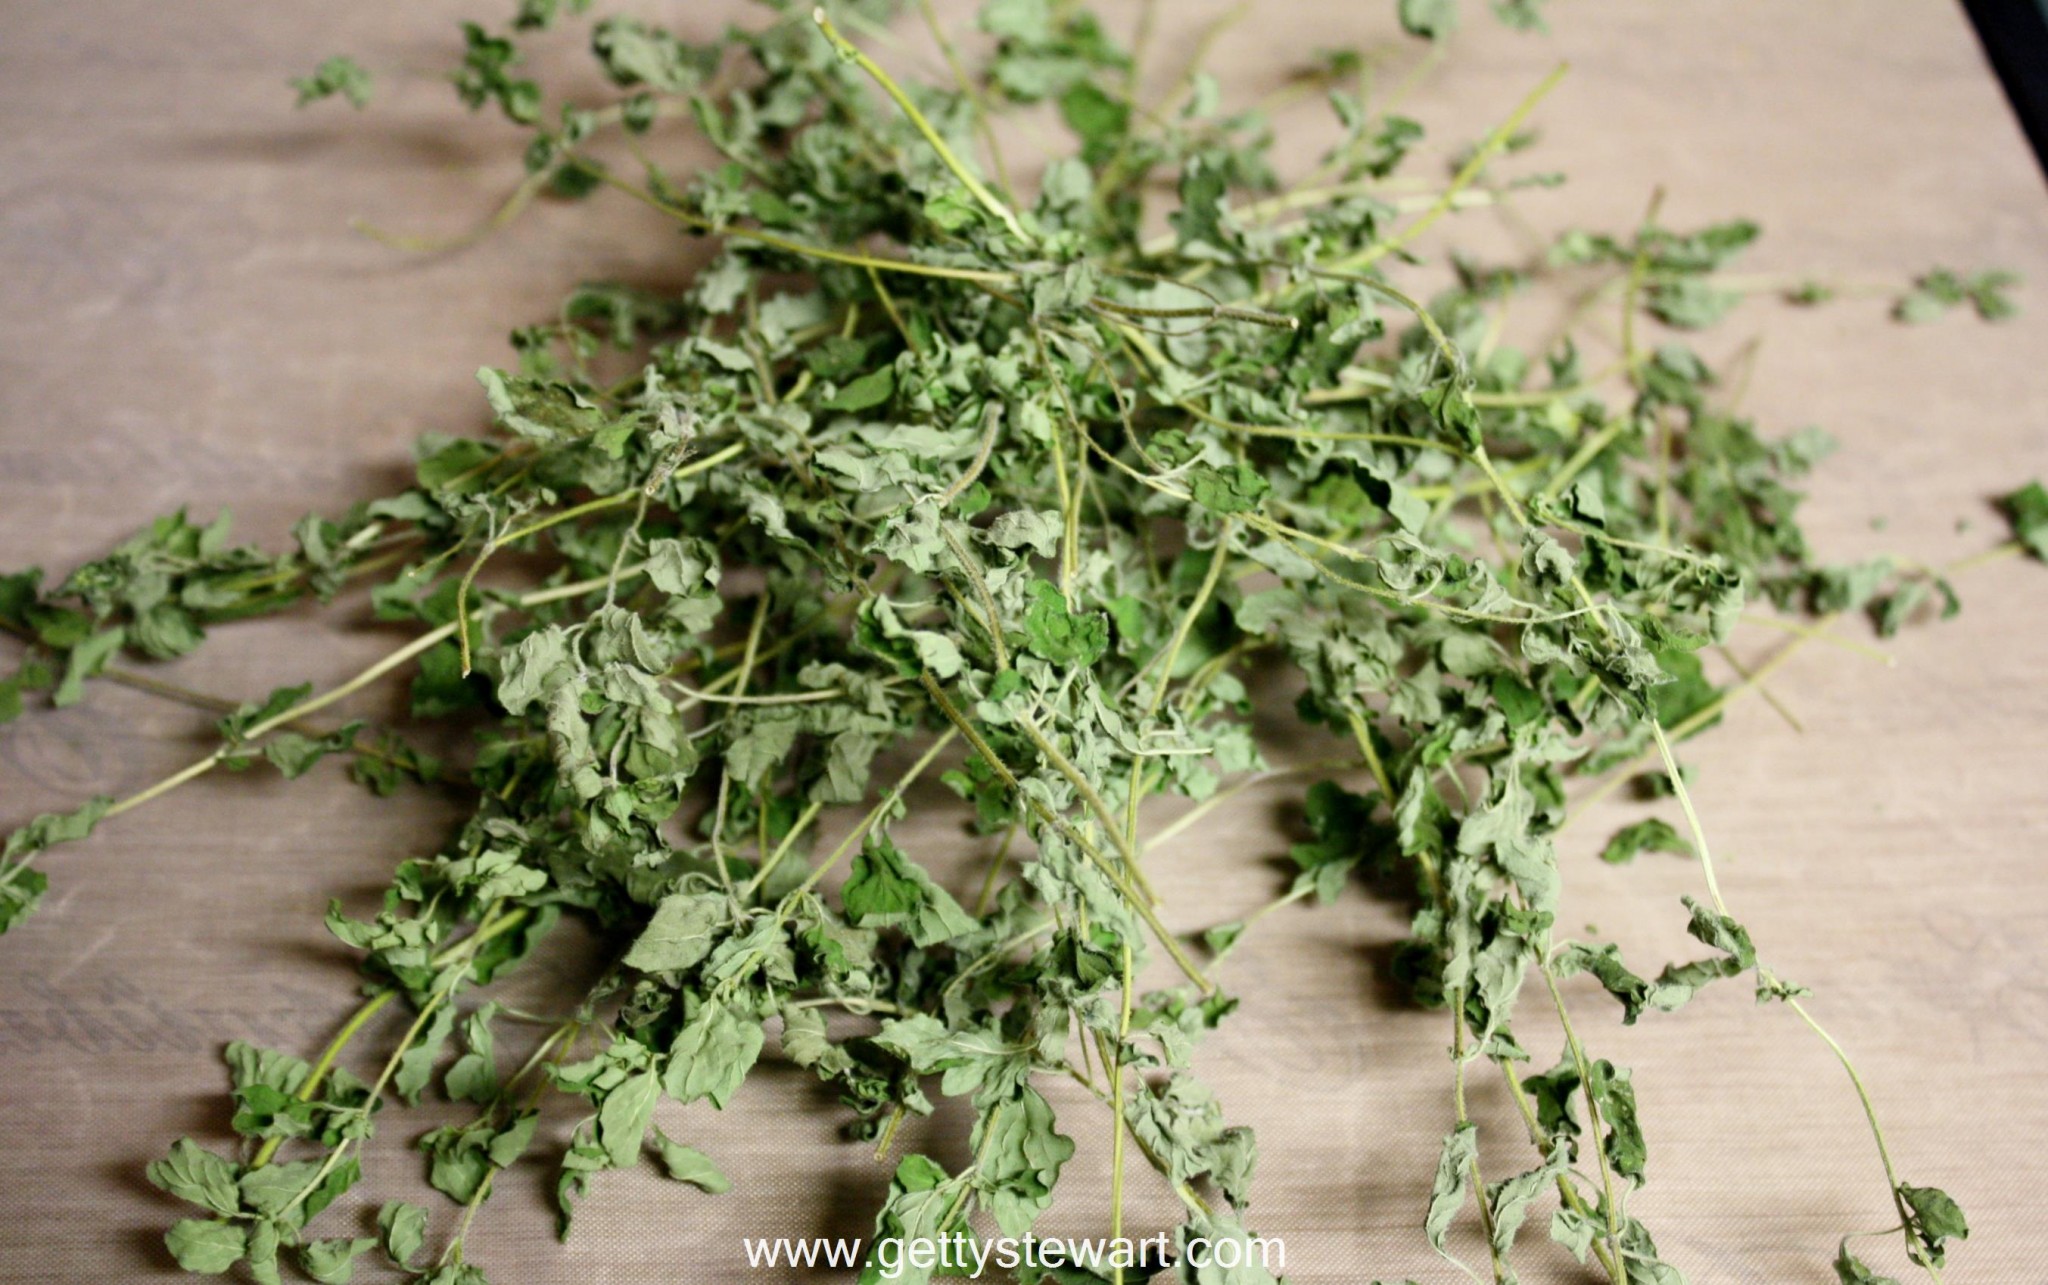 How to Cut and Dry Oregano - Getty Stewart